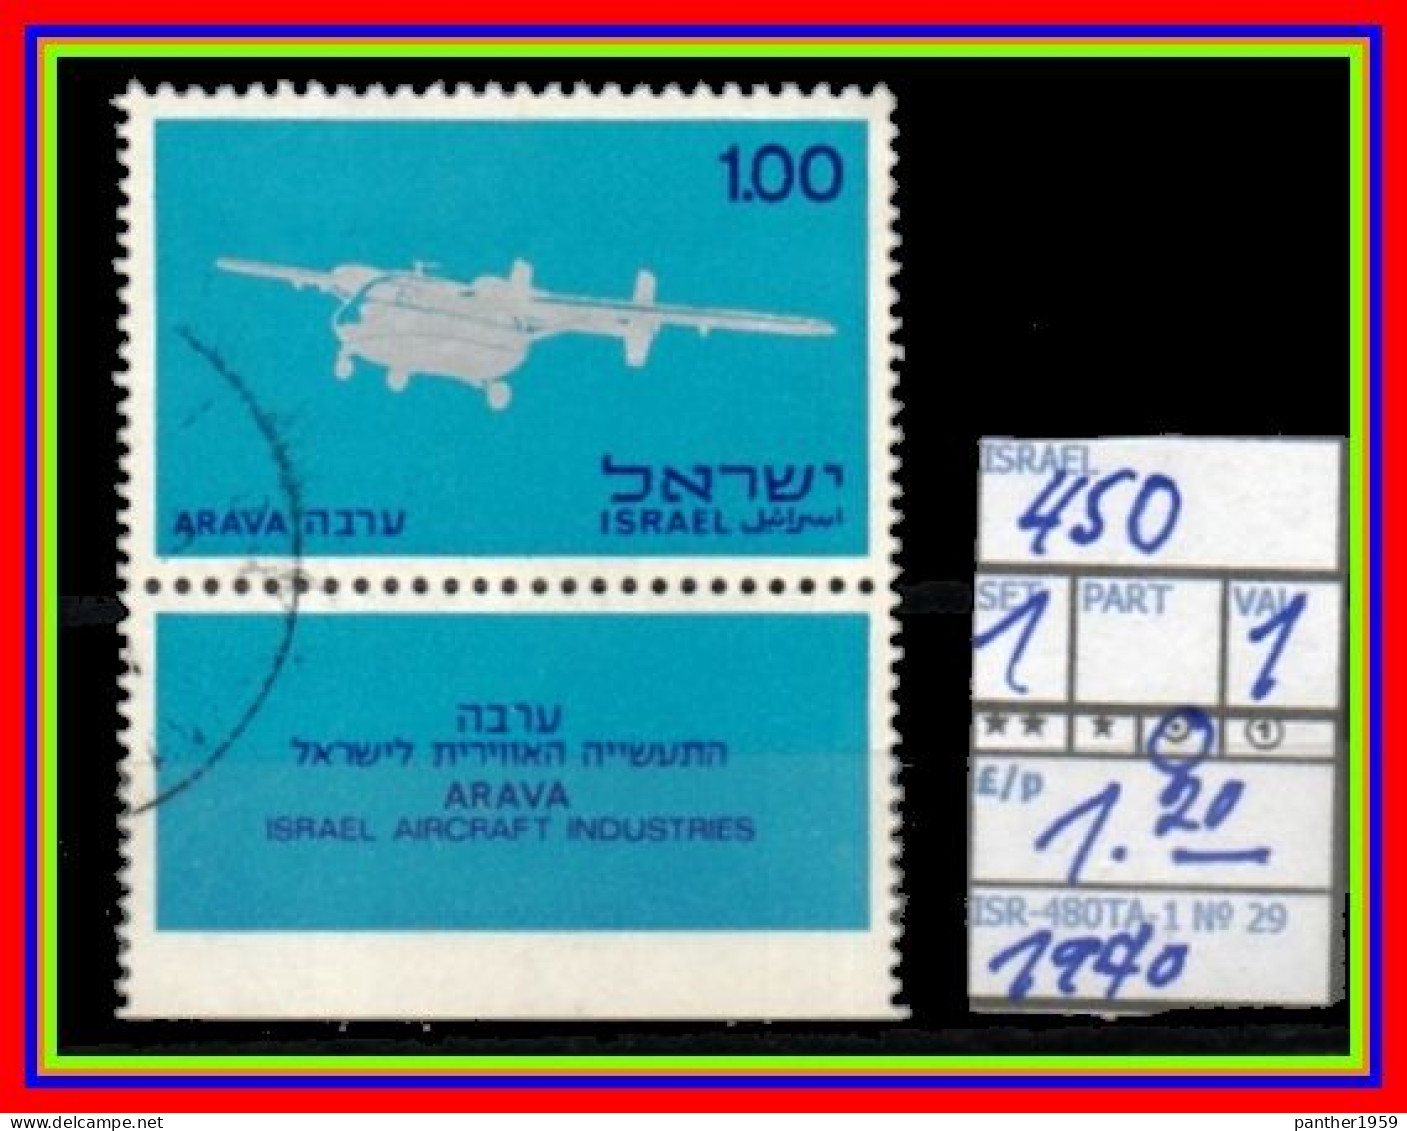 ASIA# ISRAEL# #COMMEMORATIVE SERIES WITH TABS# USED# (ISR-280TA-1) (29) - Used Stamps (with Tabs)